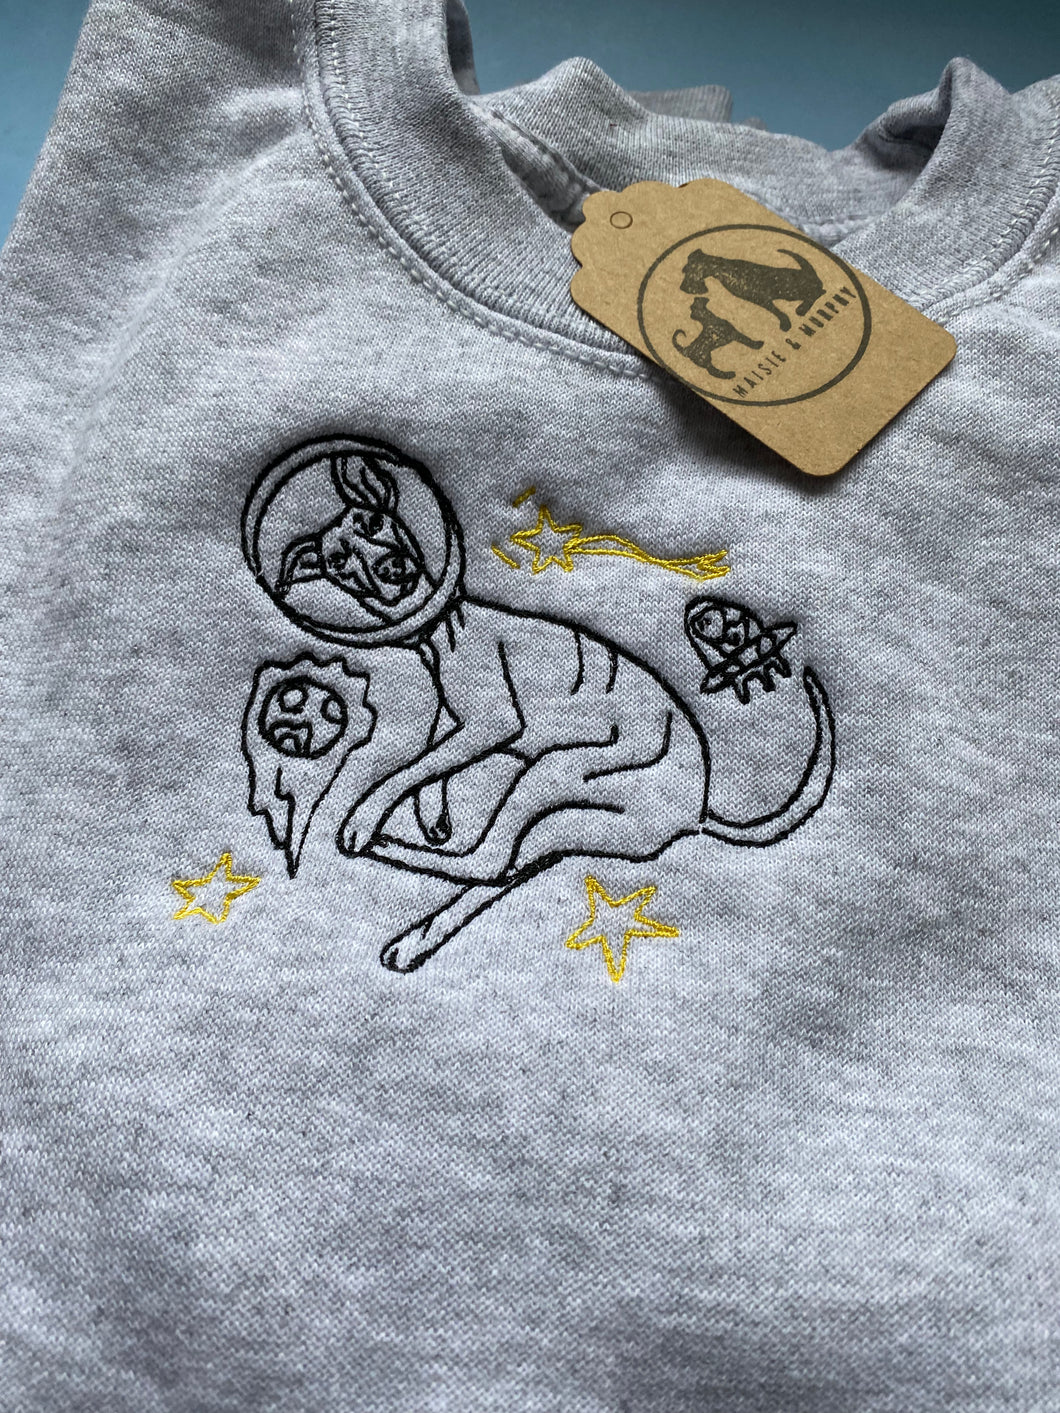 Intergalactic Dogs T-shirt - Space Sighthound